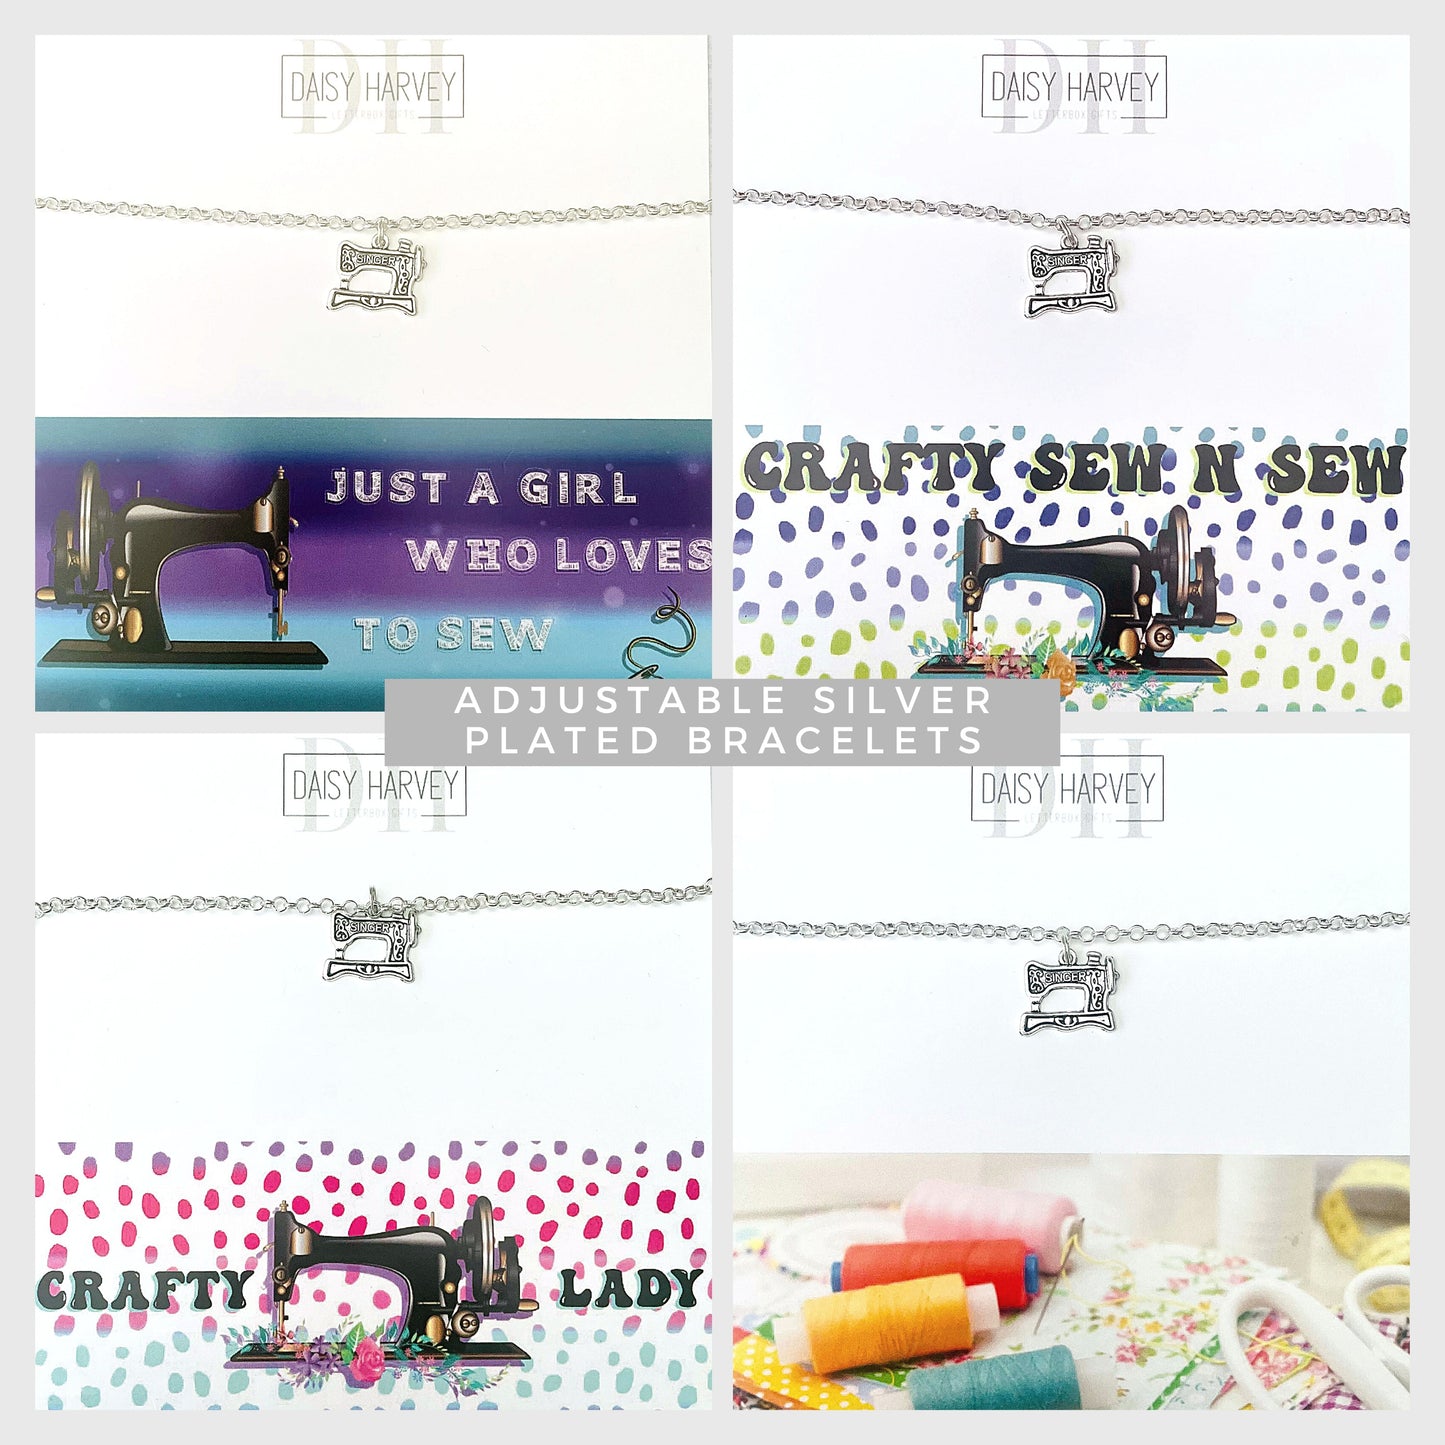 sewing-gift-ideas